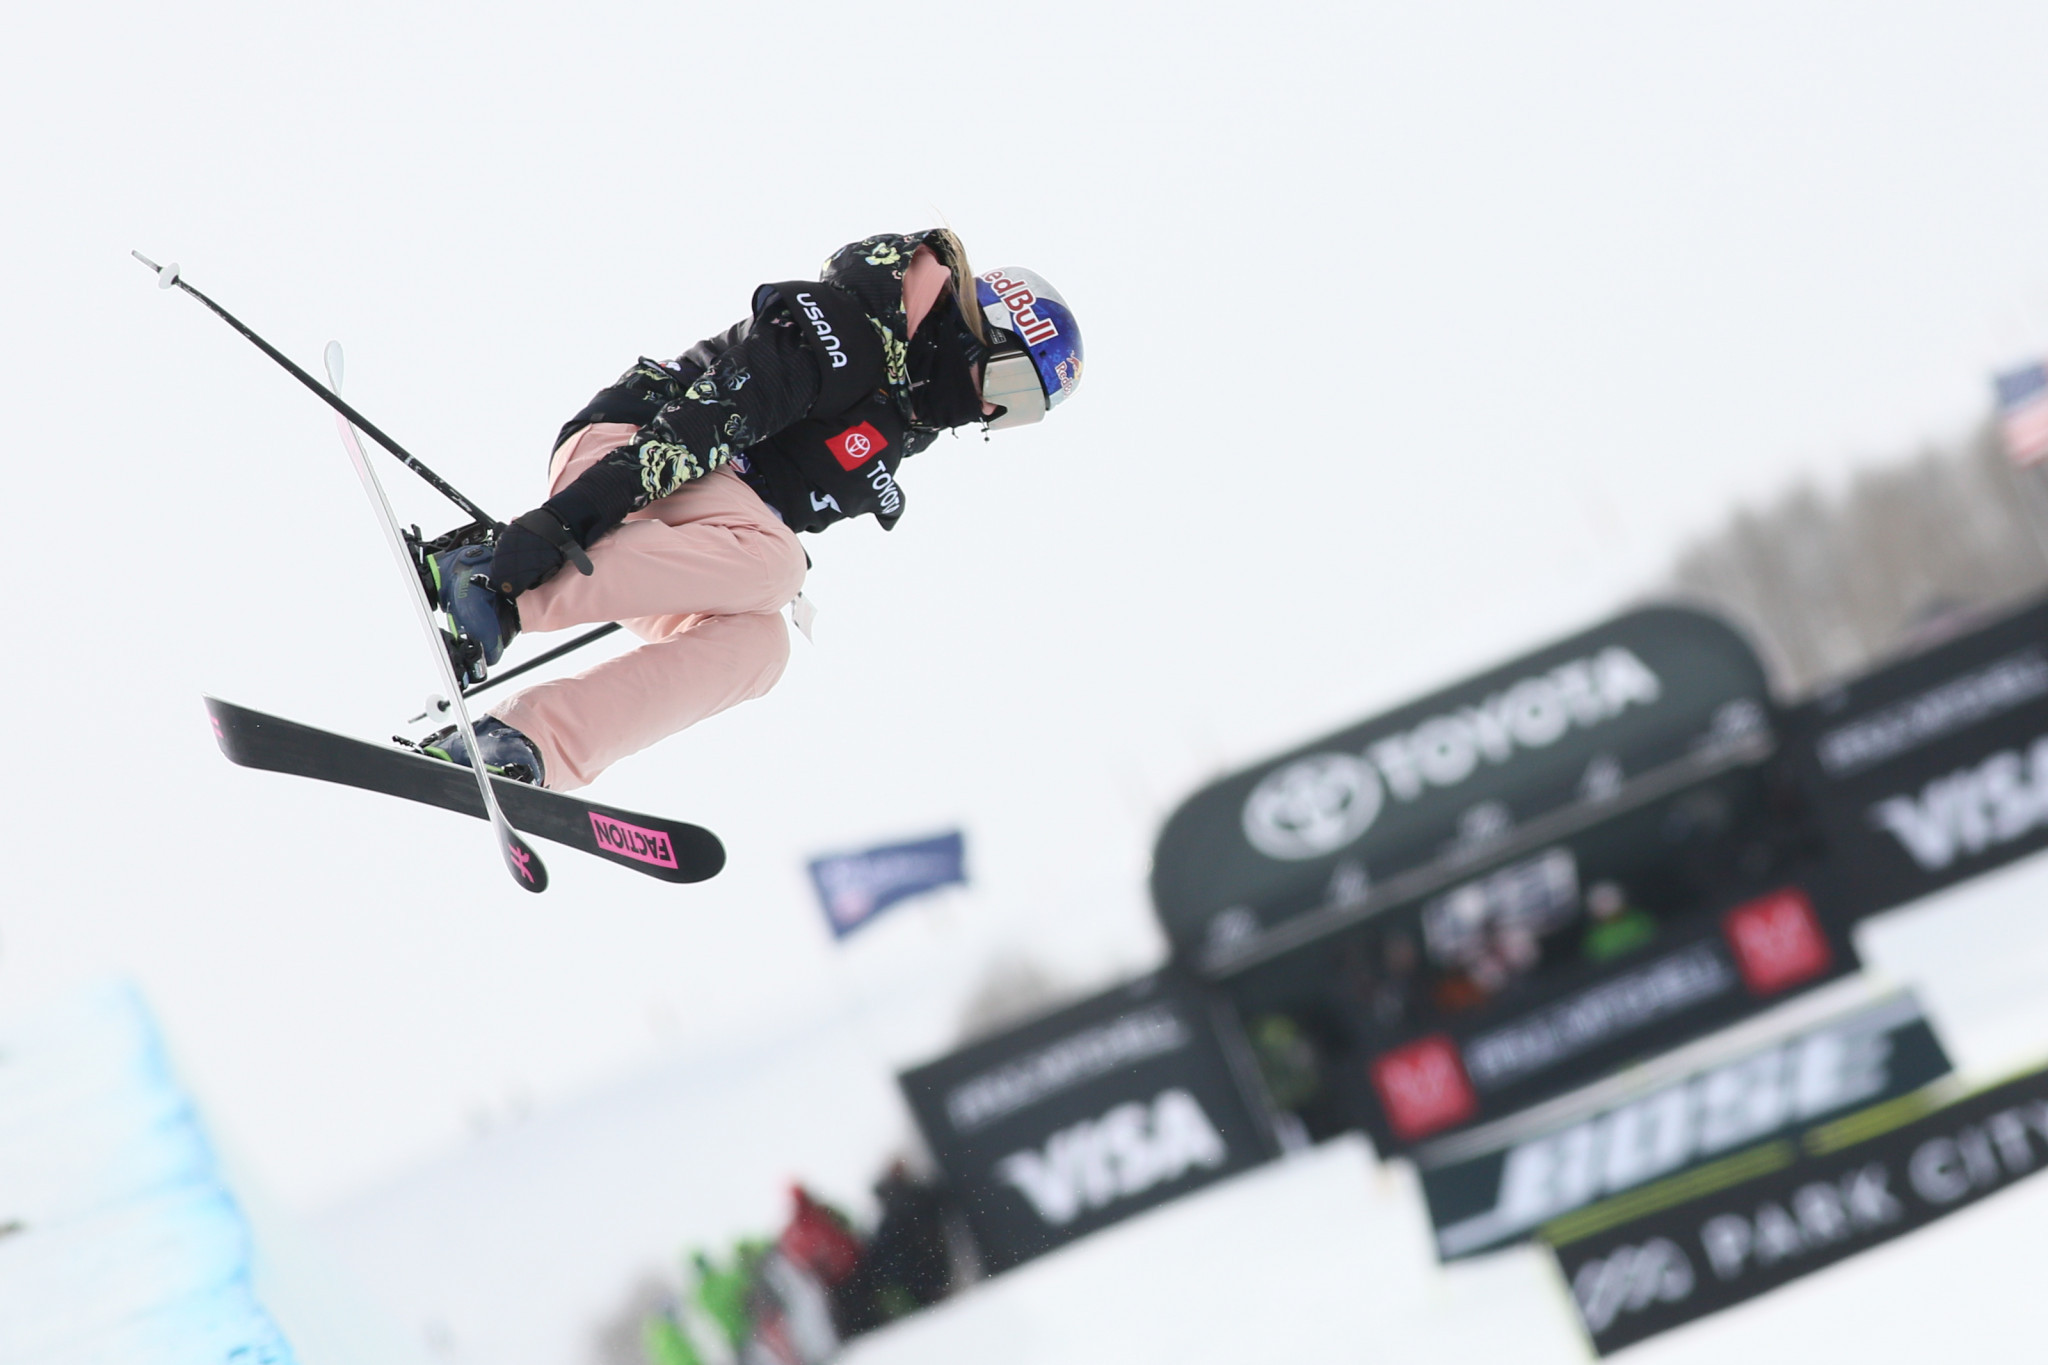 Sildaru secures women’s slopestyle title with dominant performance at FIS World Junior Freestyle Skiing Championships